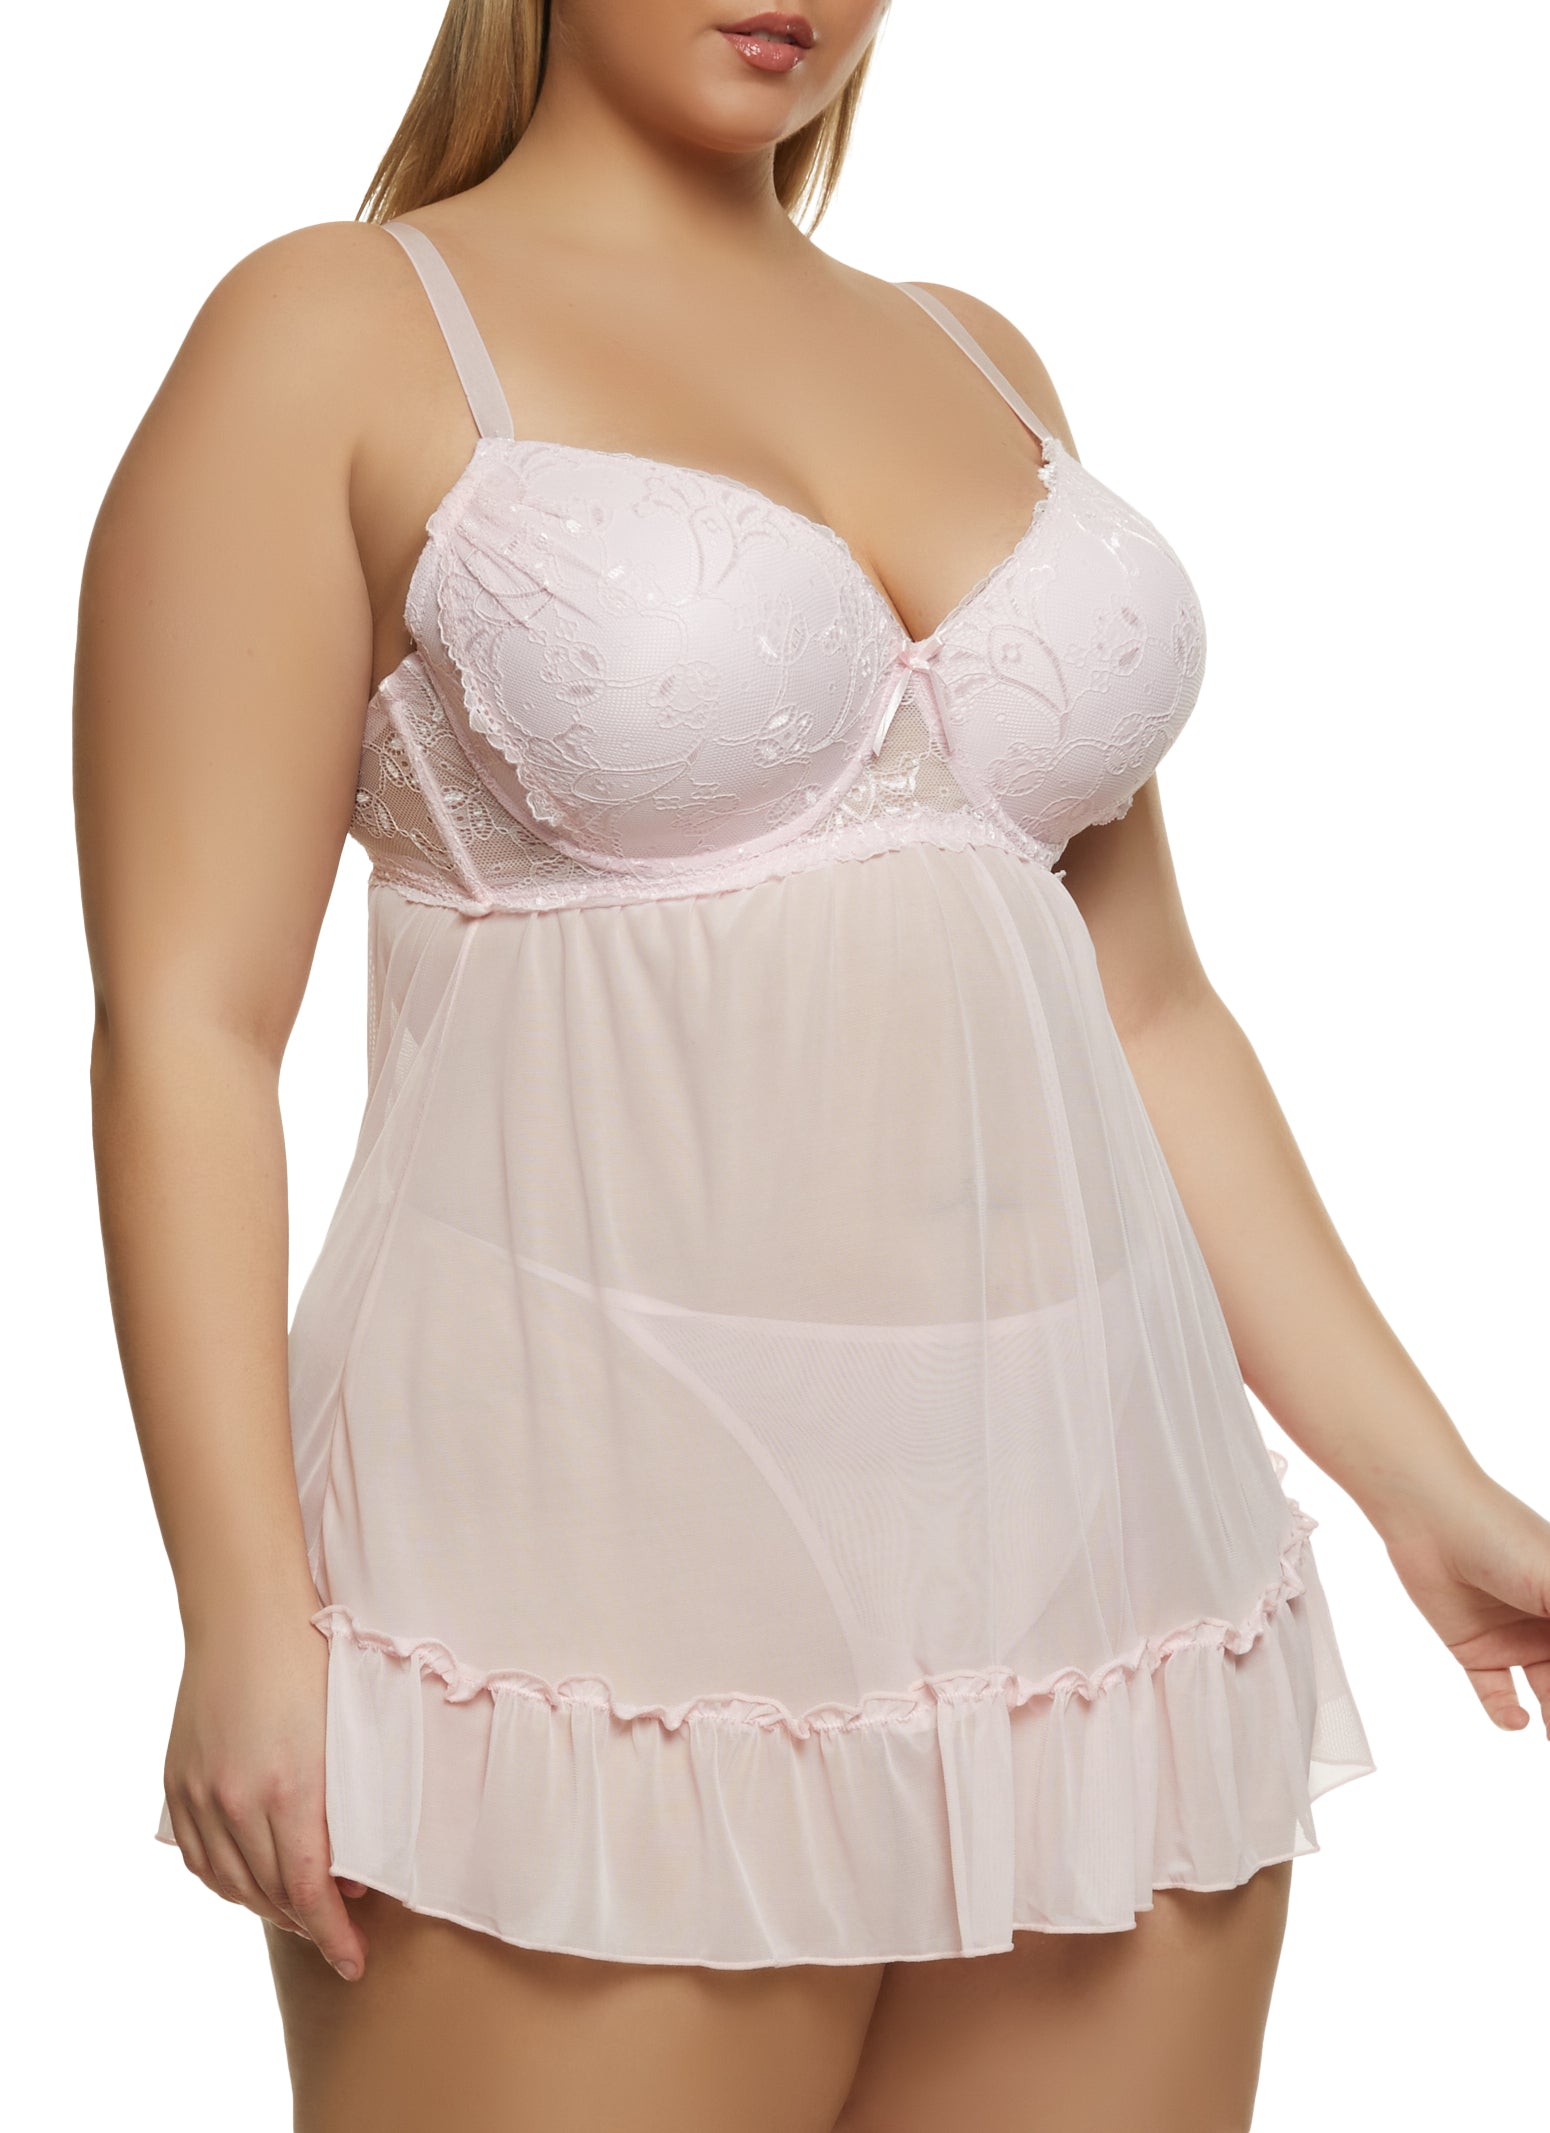 Plus-Size Babydoll Lingerie Shopping Guide